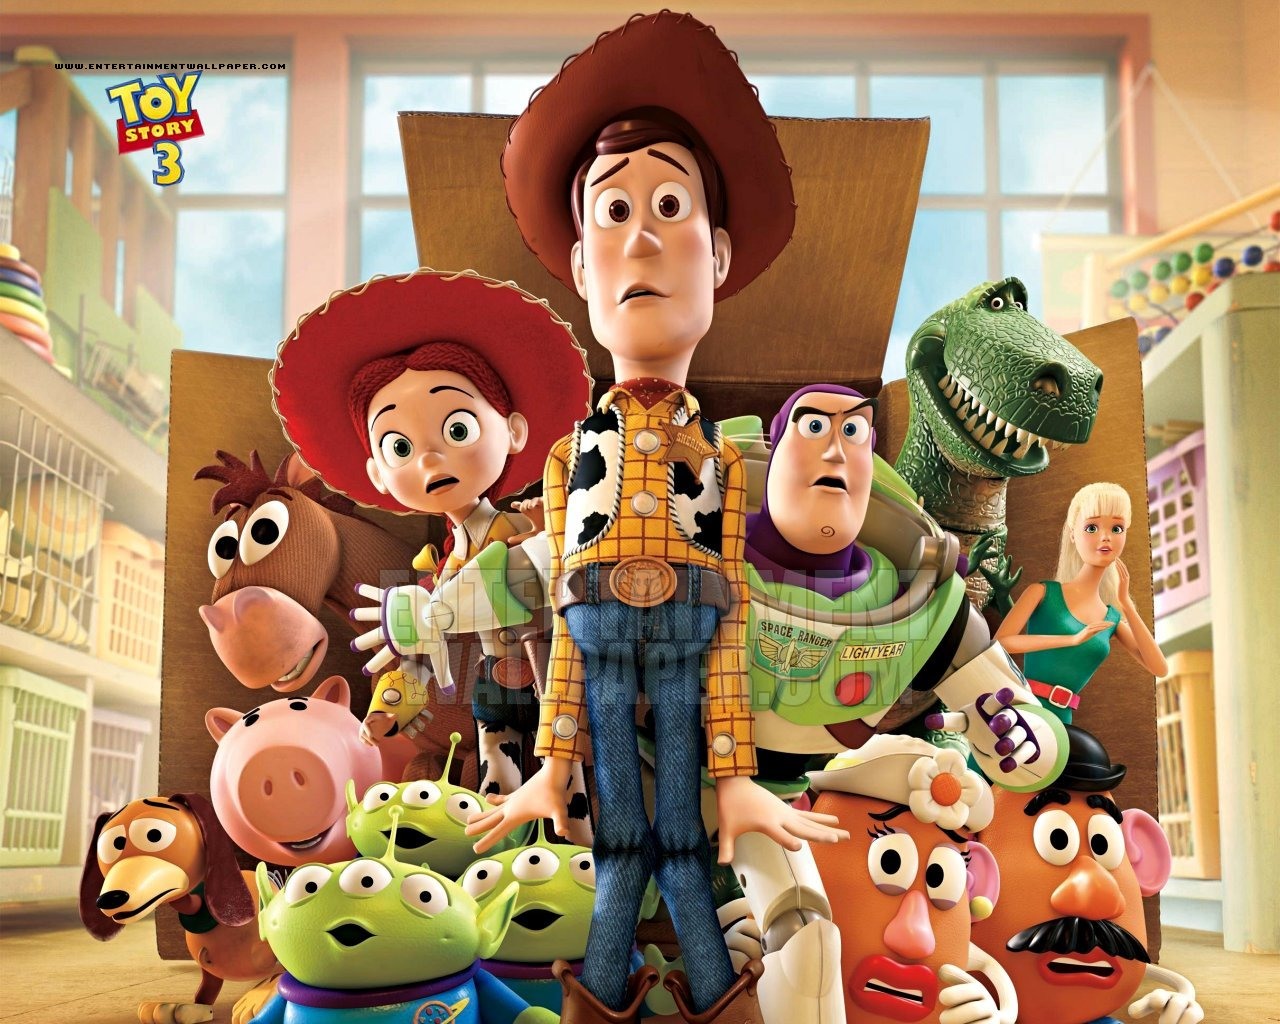 Related Post "Toy Story 3 Wallpaper Background"